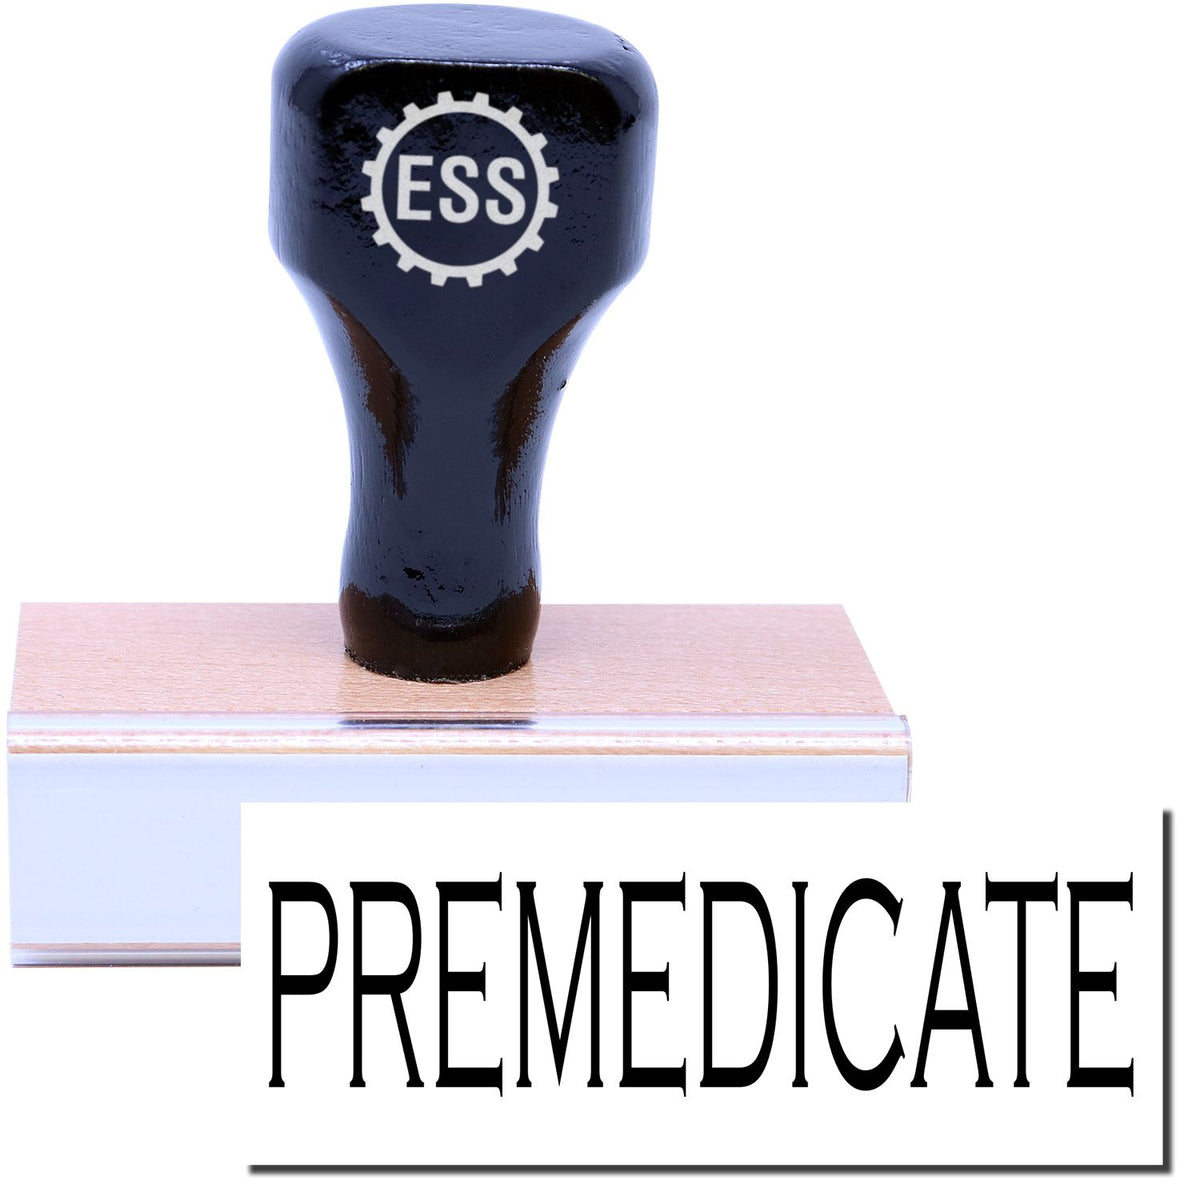 A stock office rubber stamp with a stamped image showing how the text &quot;PREMEDICATE&quot; in a large font is displayed after stamping.